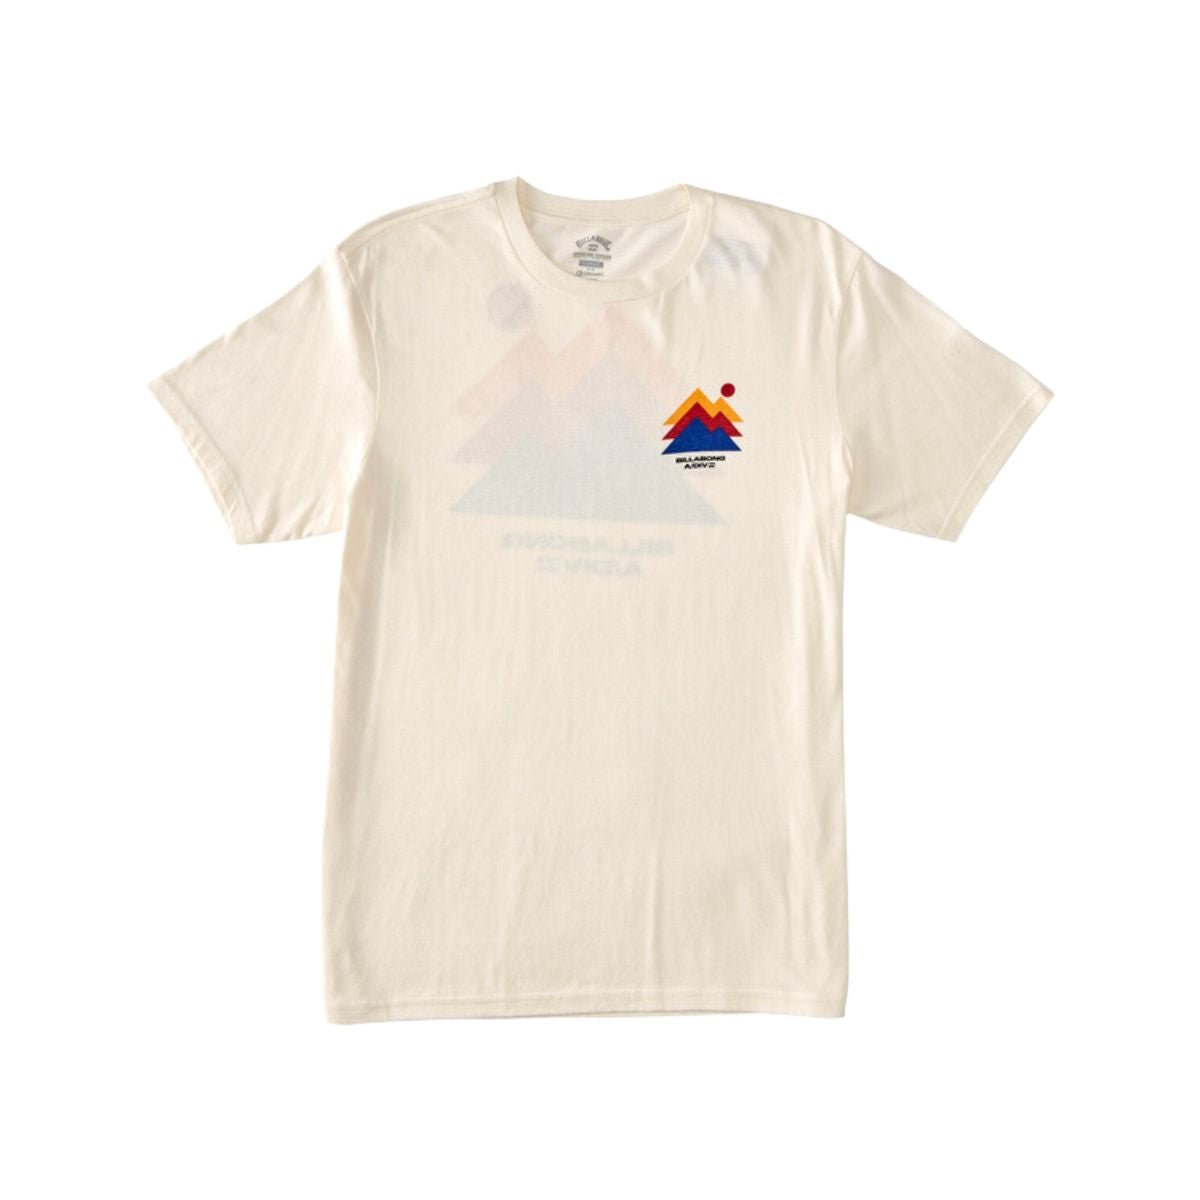 Billabong Stepped Short Sleeve Tee in Off White - BoardCo